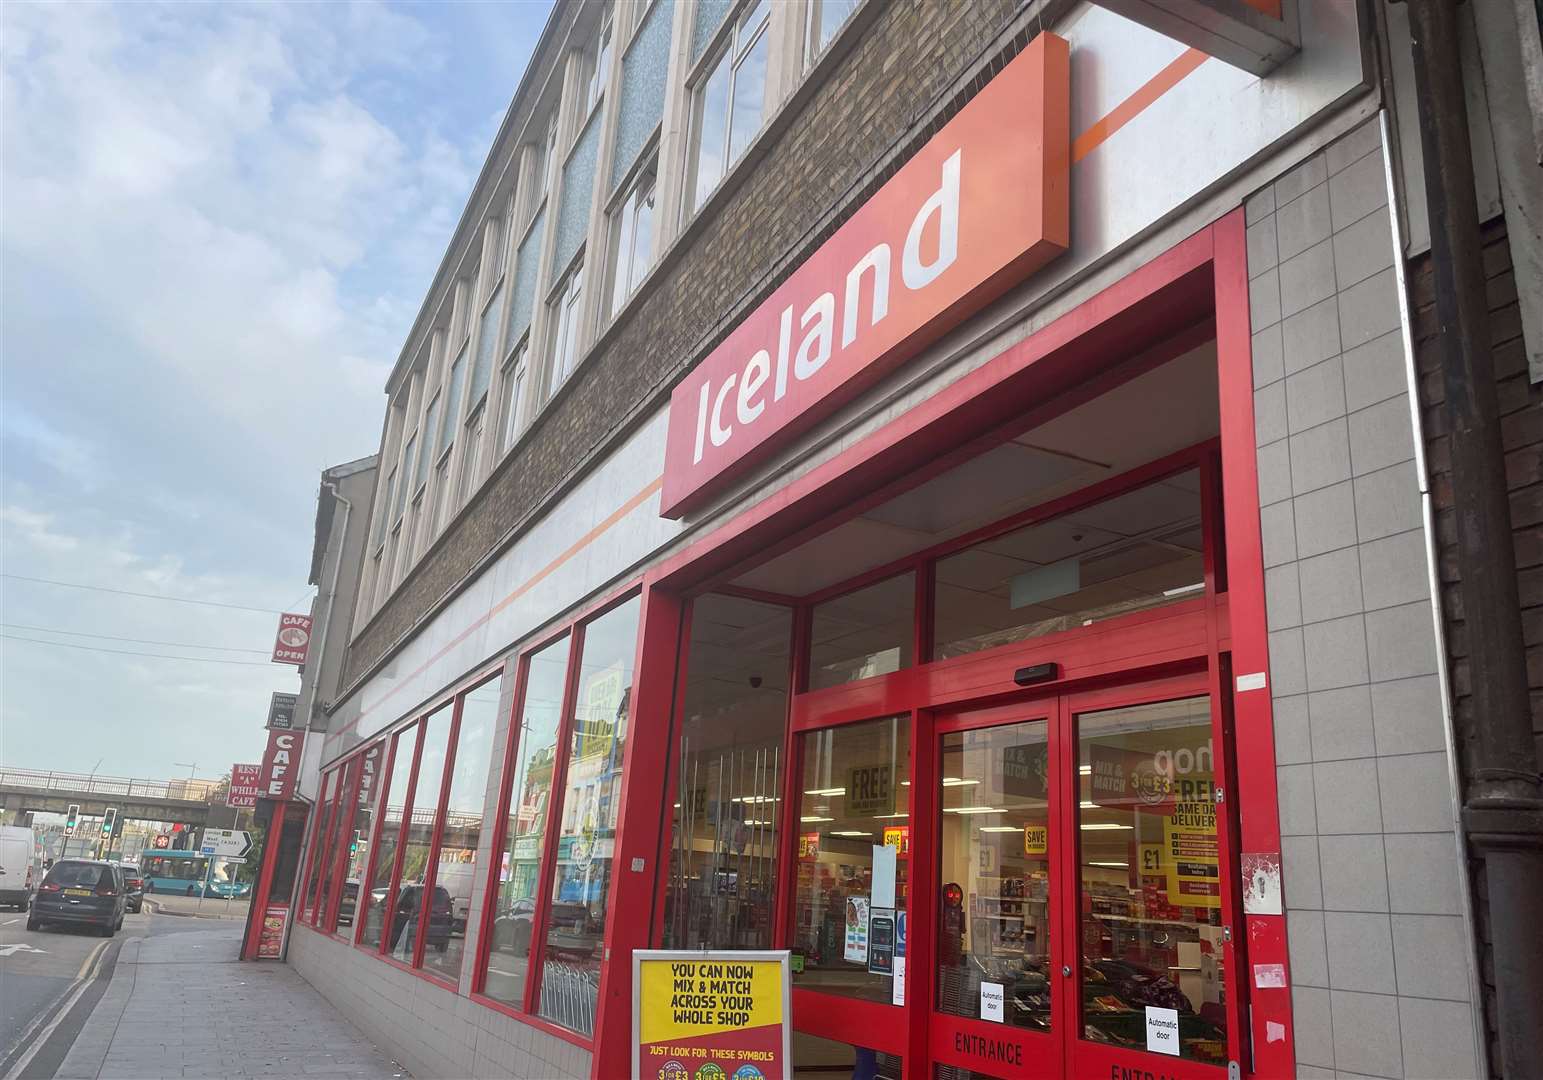 Iceland bought multiple stores in Kent, including this one in Strood